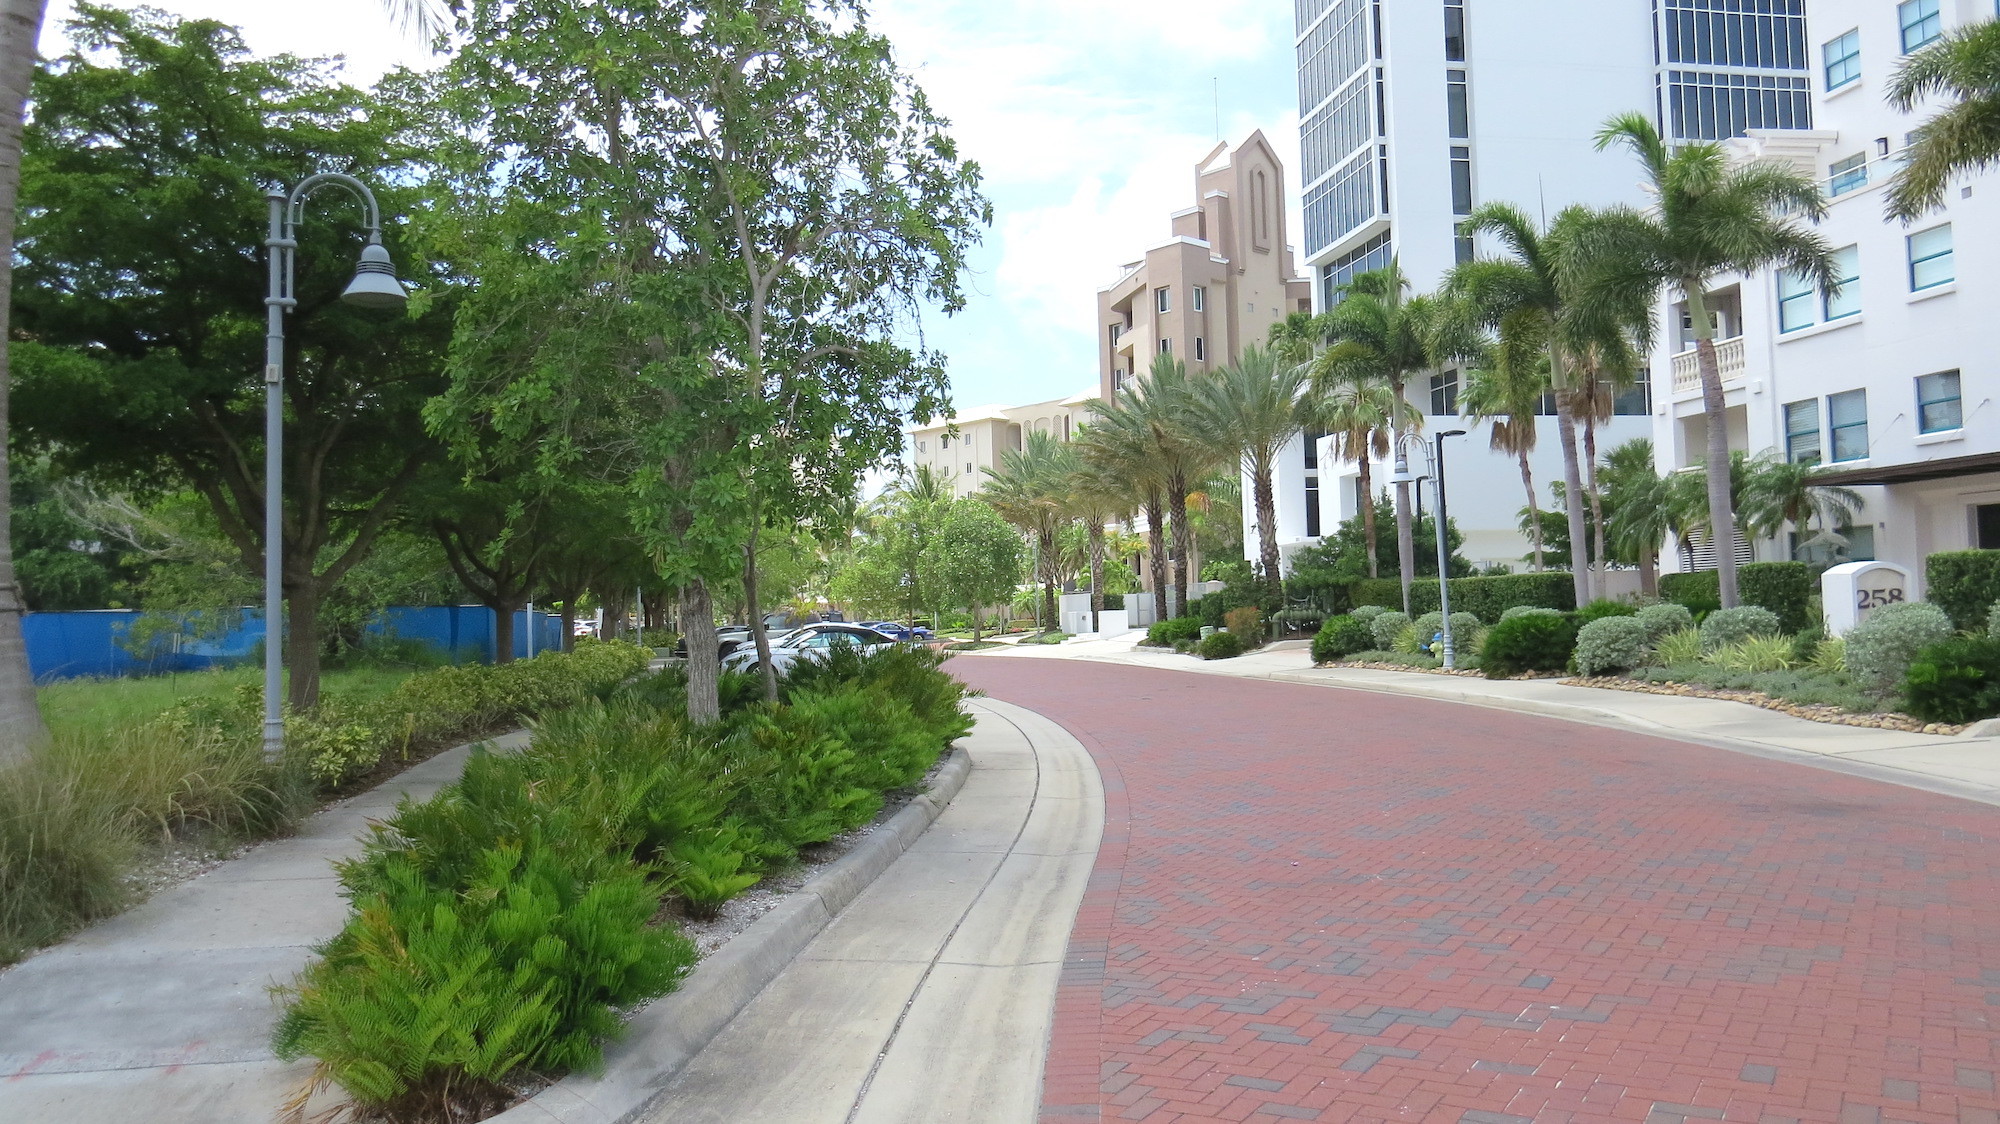 The 22-acre Golden Gate Point ellipse is a single paver street ringed with condominium towers along the perimeter. The planned Peninsula Sarasota site is to the left.